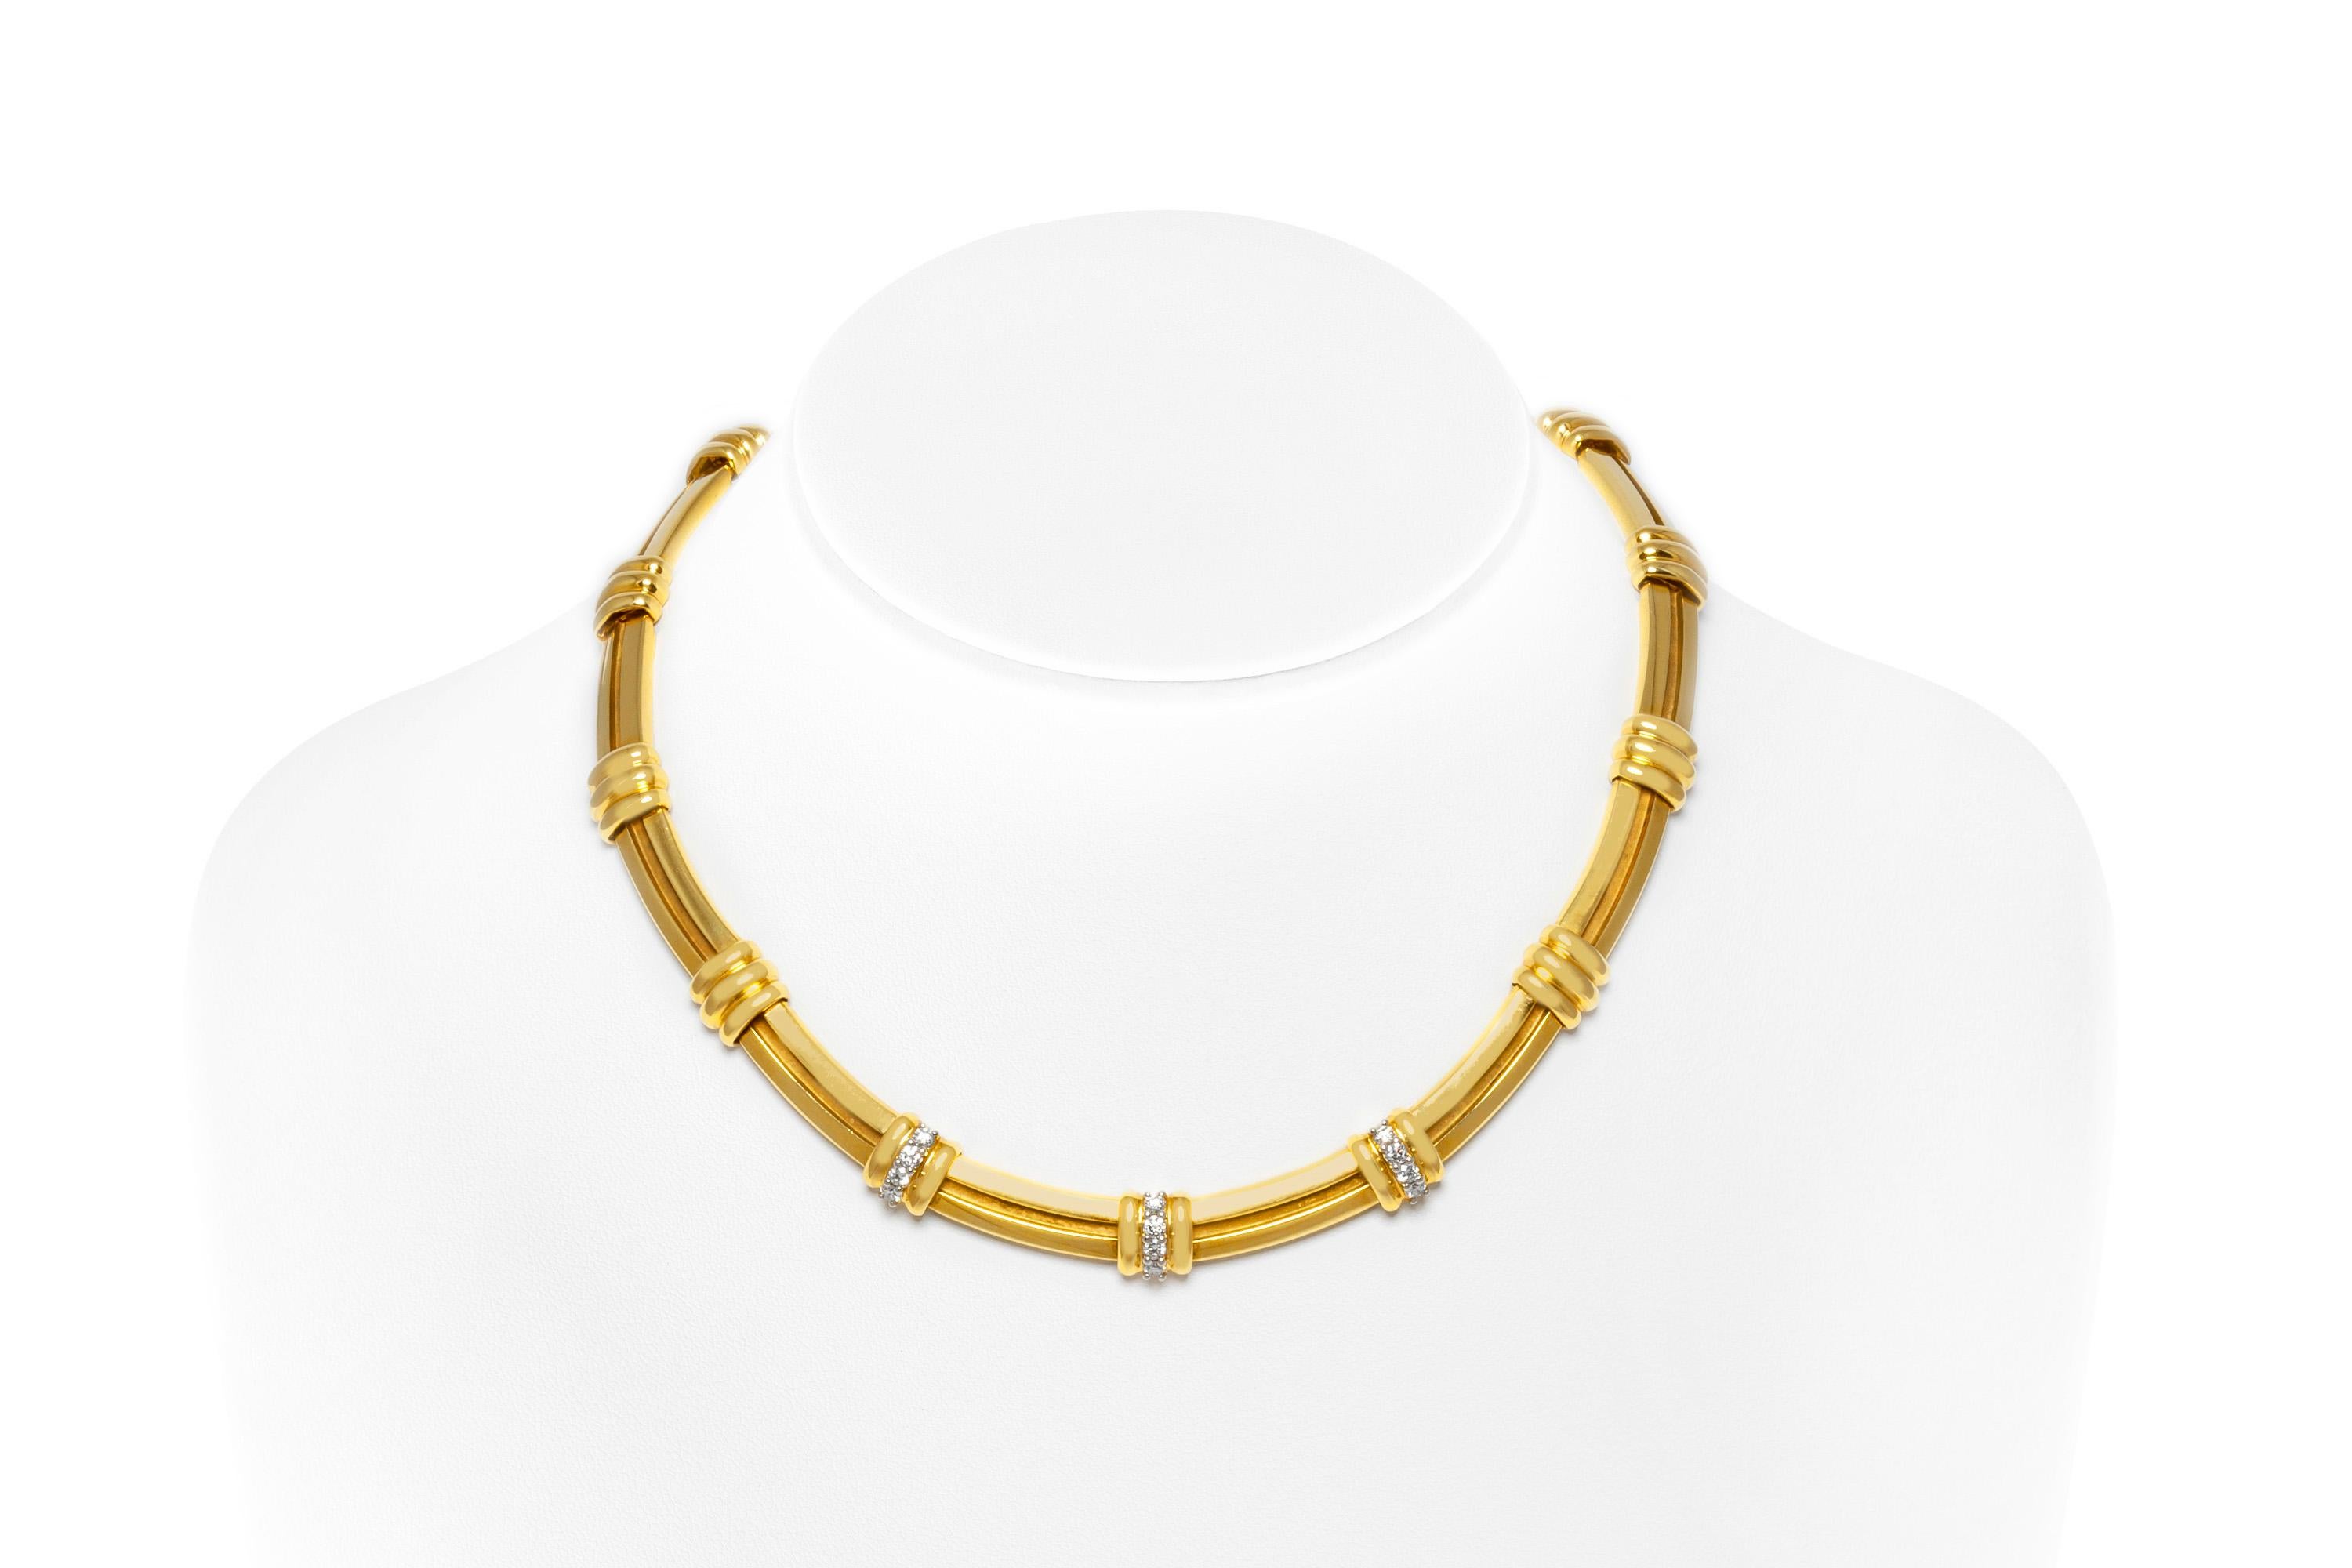 Tiffany & Co. necklace, finely crafted in 18k yellow gold with diamonds weighing approximately a total of 0.80 carats. Circa 1970's.